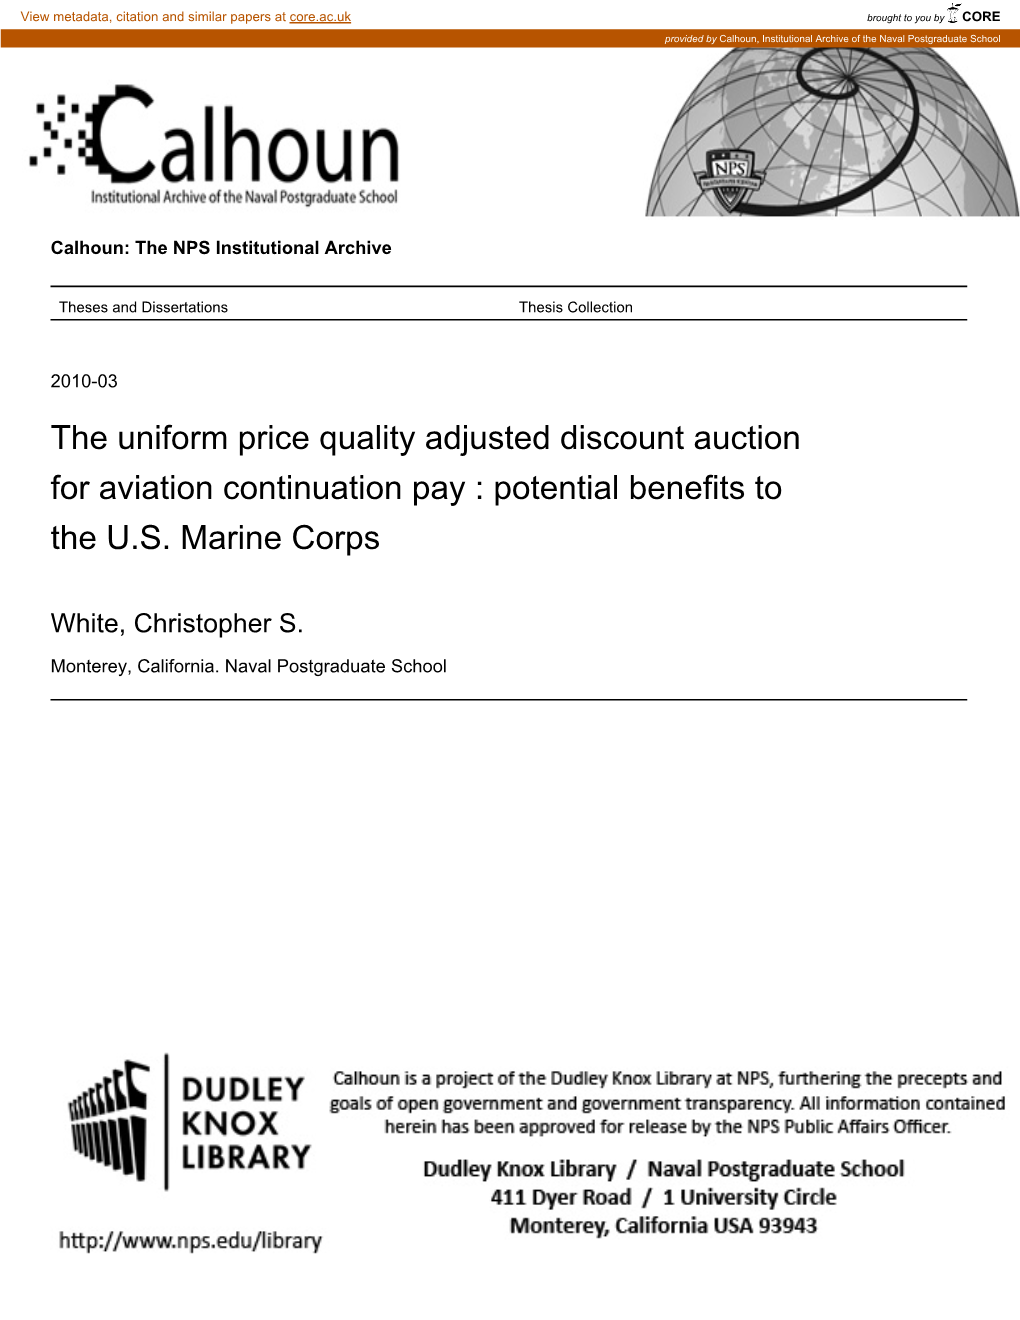 The Uniform Price Quality Adjusted Discount Auction for Aviation Continuation Pay : Potential Benefits to the U.S